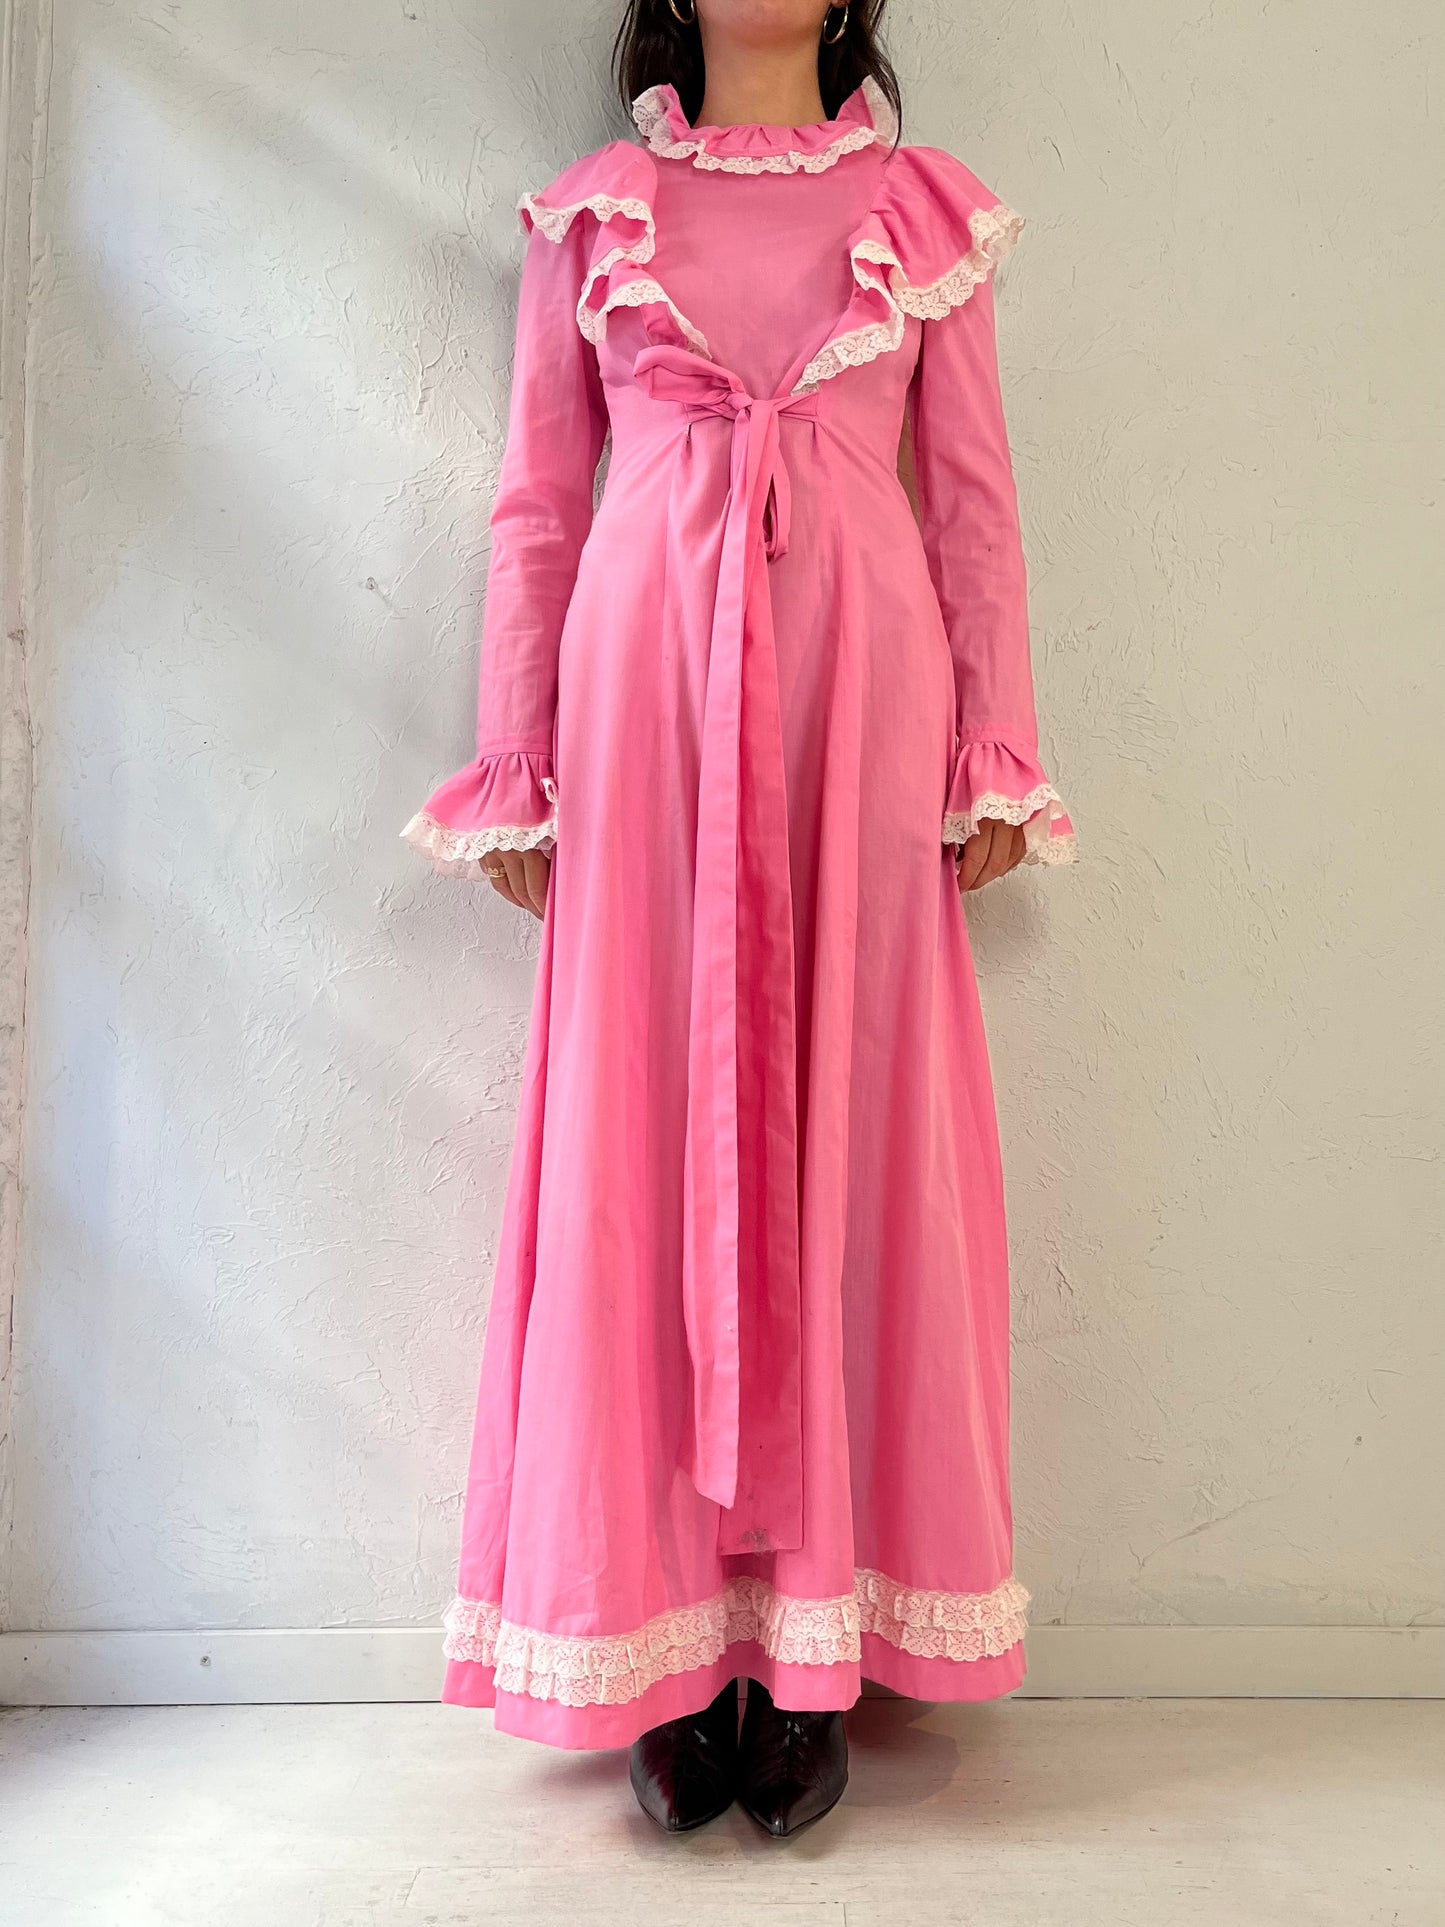 Vintage Handmade Pink Cottage Core Dress / Small